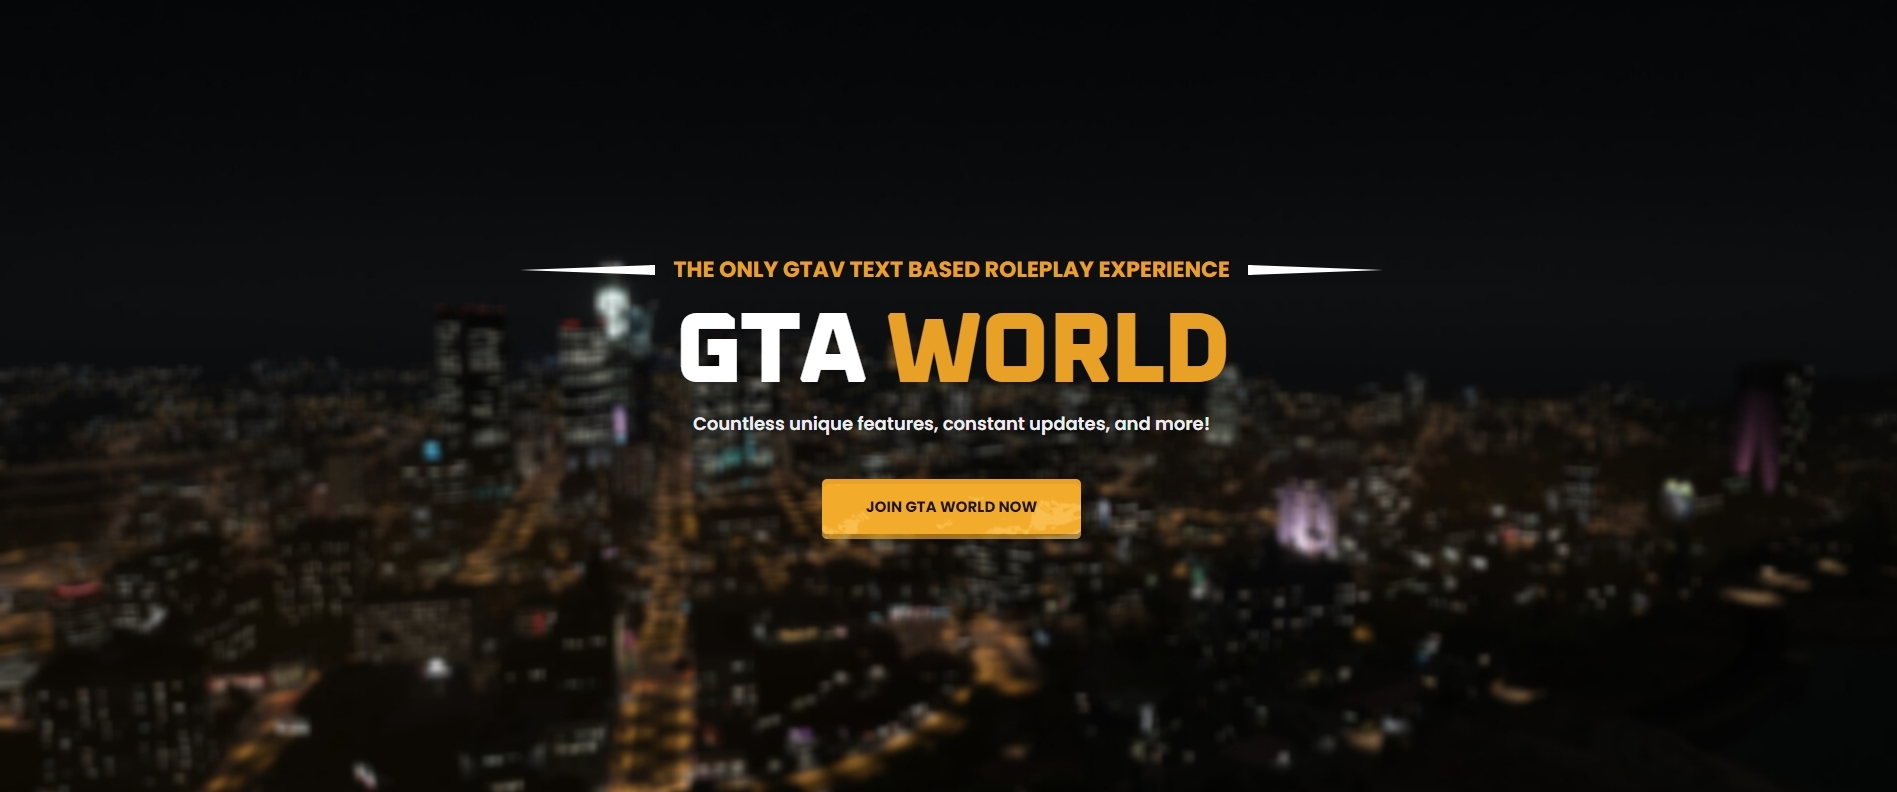 How to install mods on RAGEMP - Community Guides - GTA World